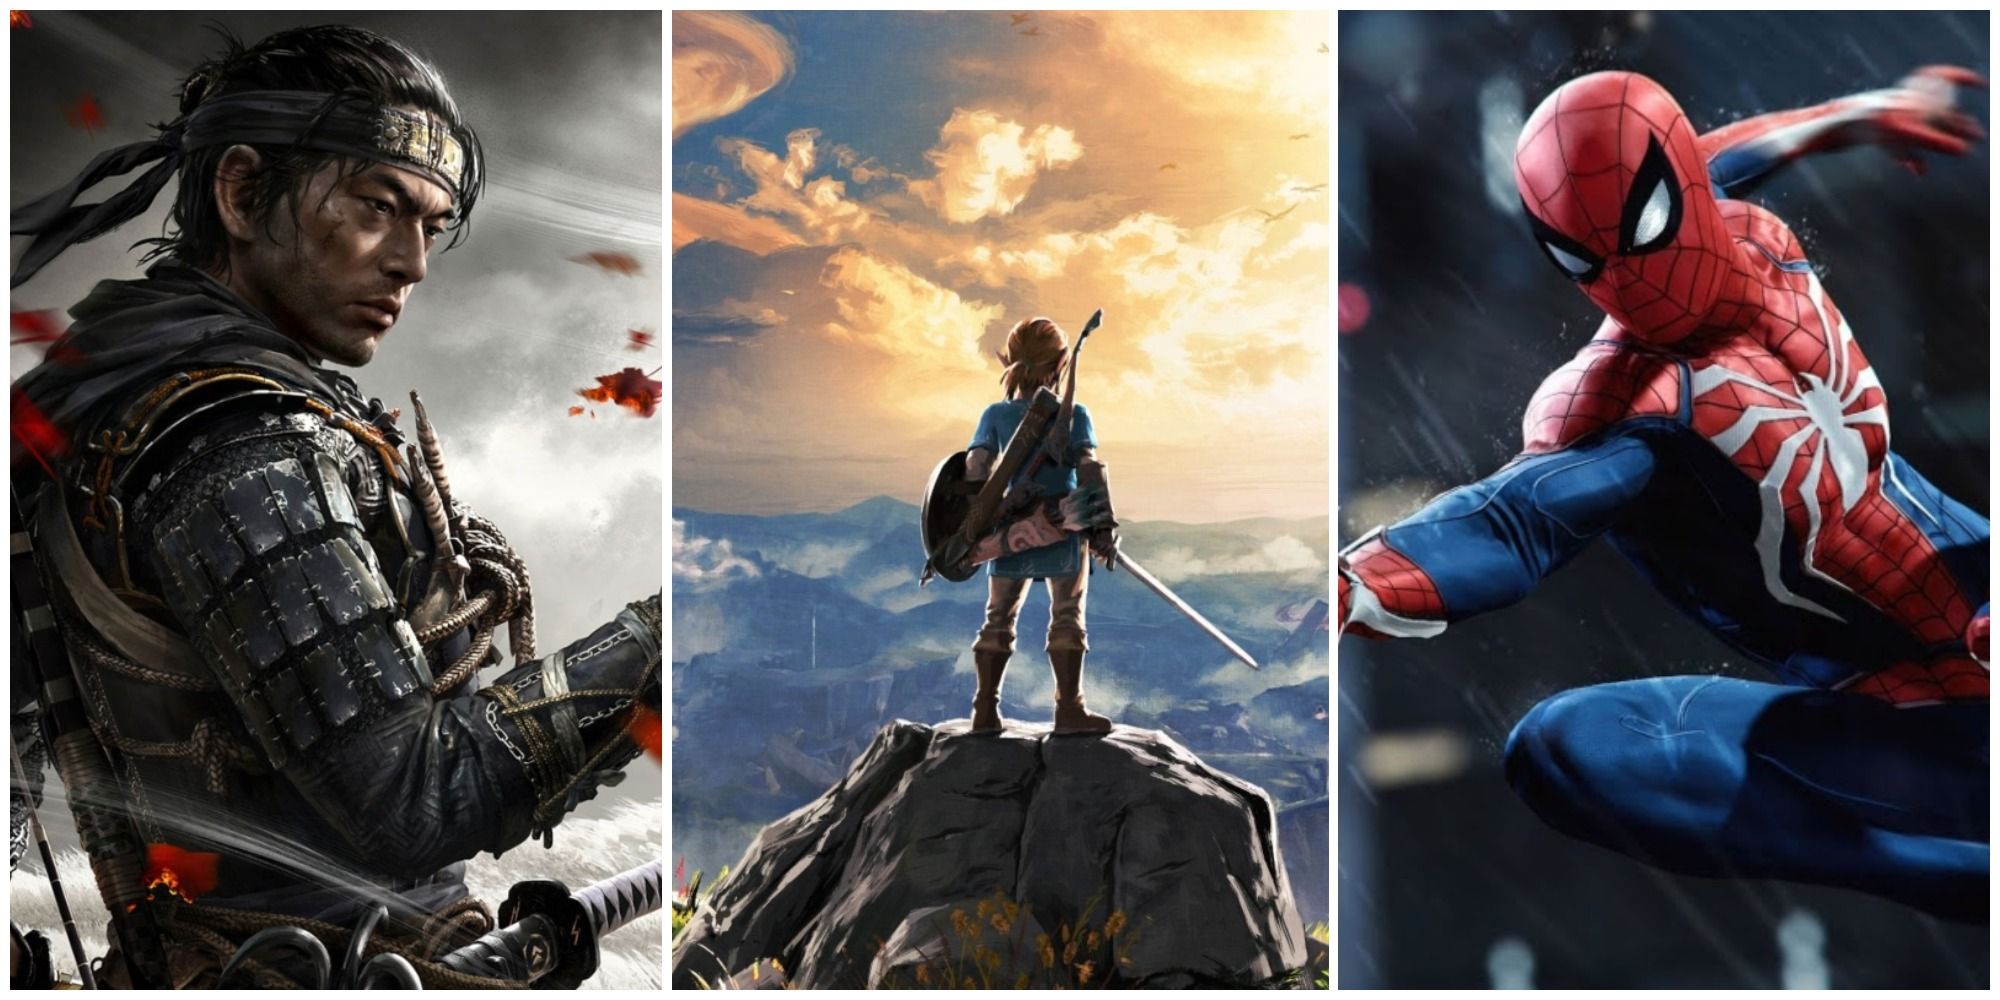 The 10 best open world games of the generation (according to Metacritic)